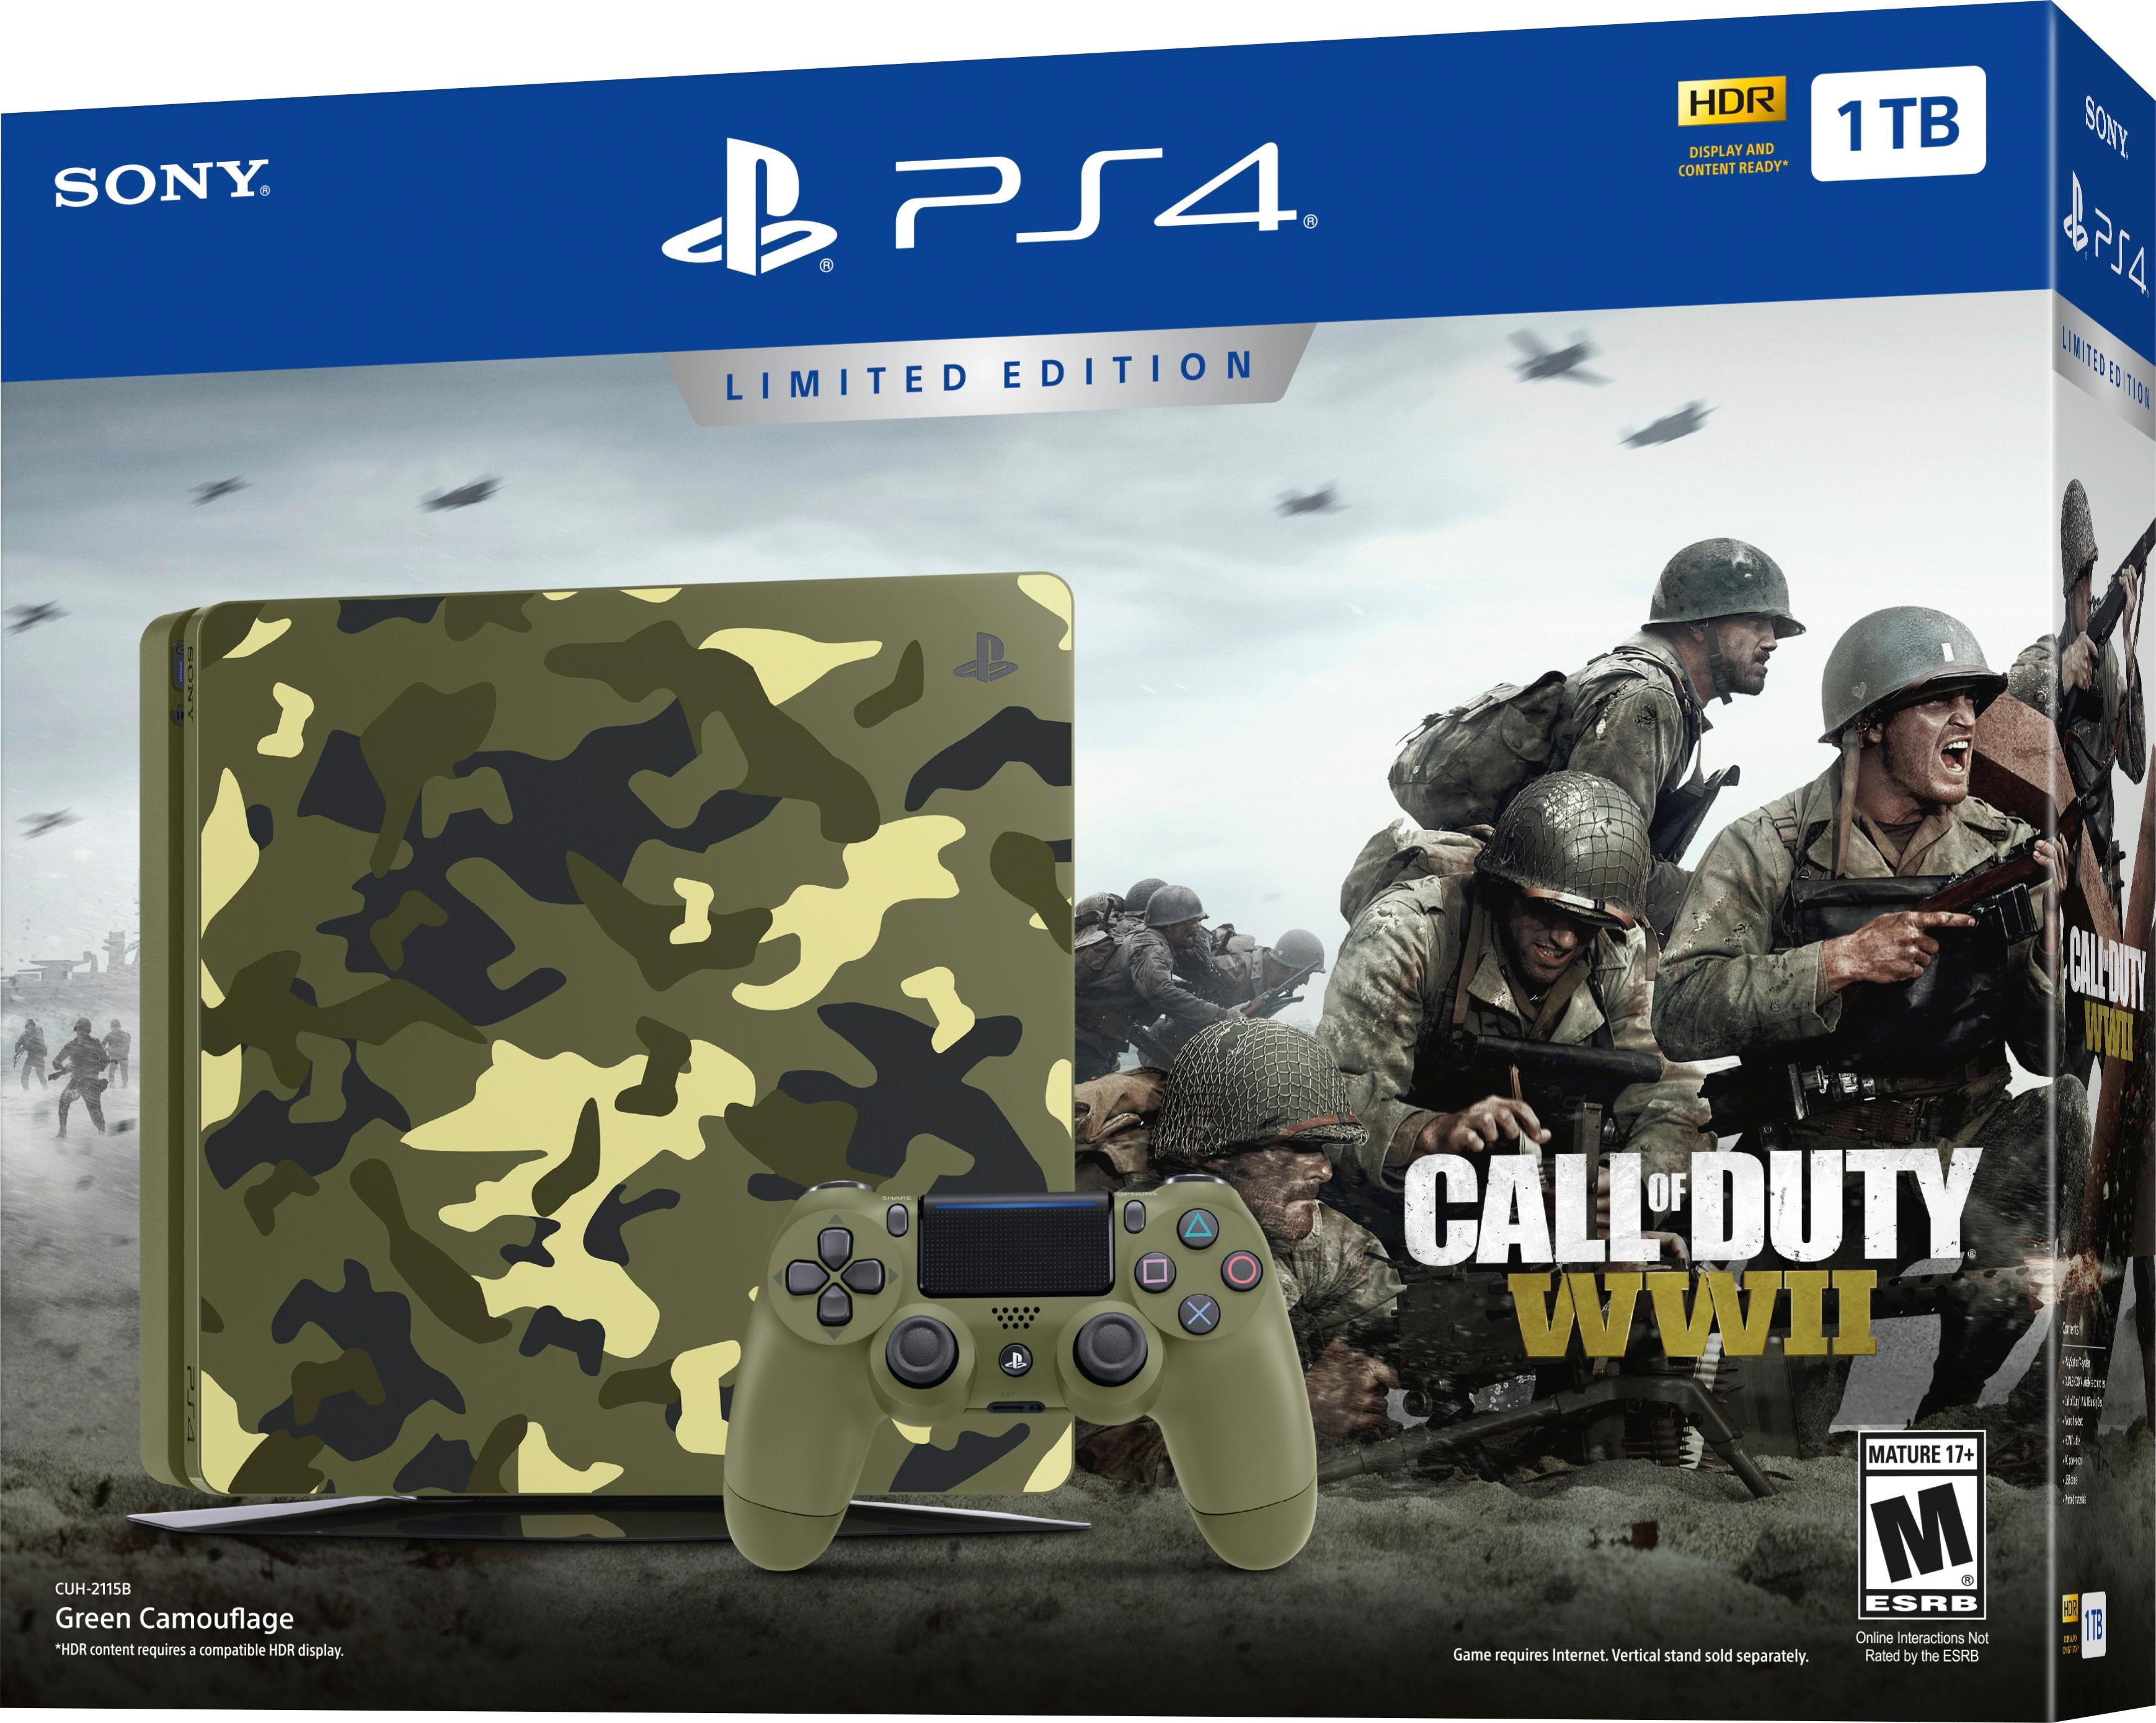 Call of Duty WW2 PS4 and Xbox One UPDATE as fans look for Black Friday 2017  deals, Gaming, Entertainment